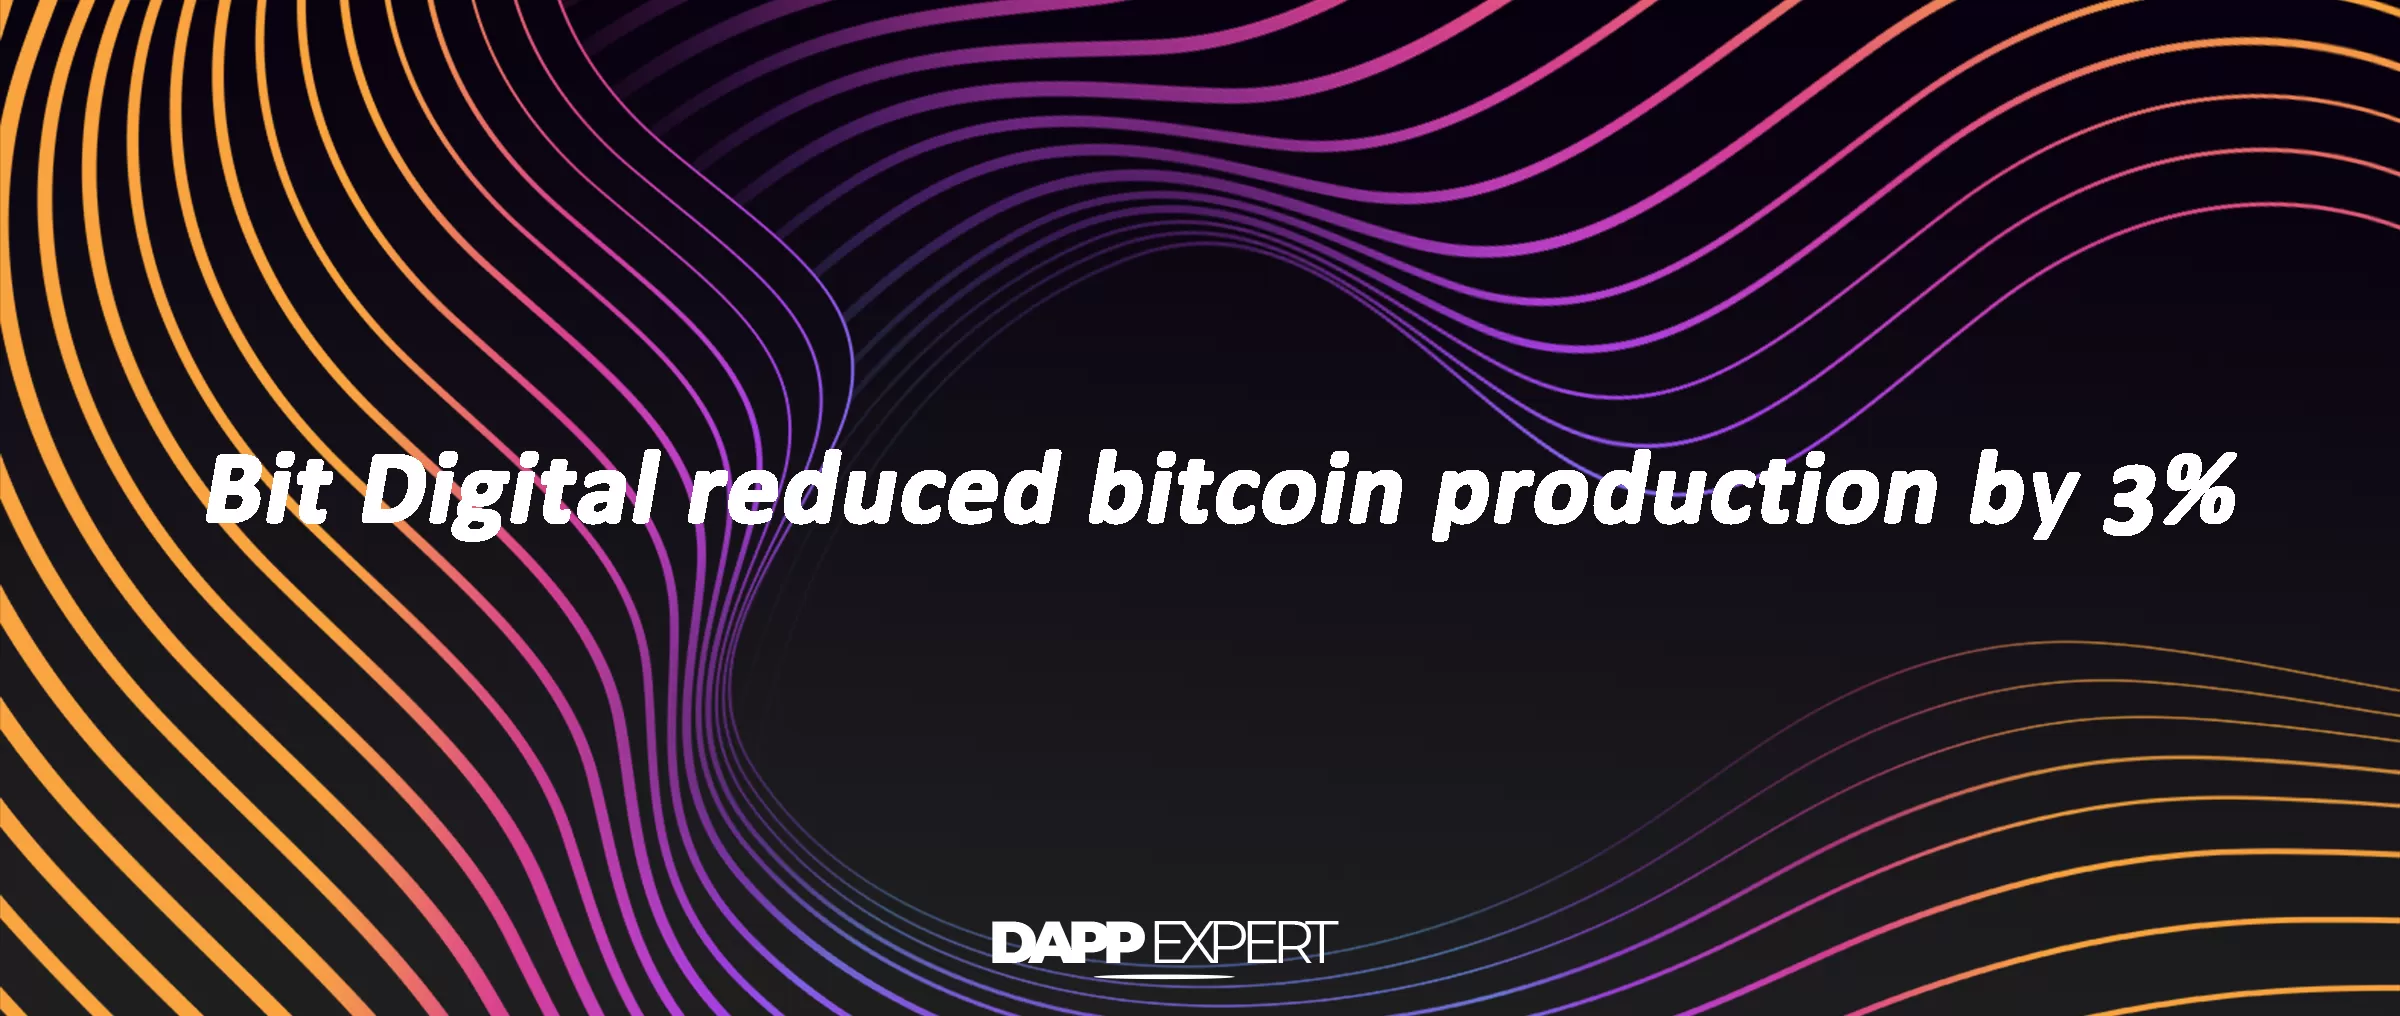 Bit Digital reduced bitcoin production by 3%